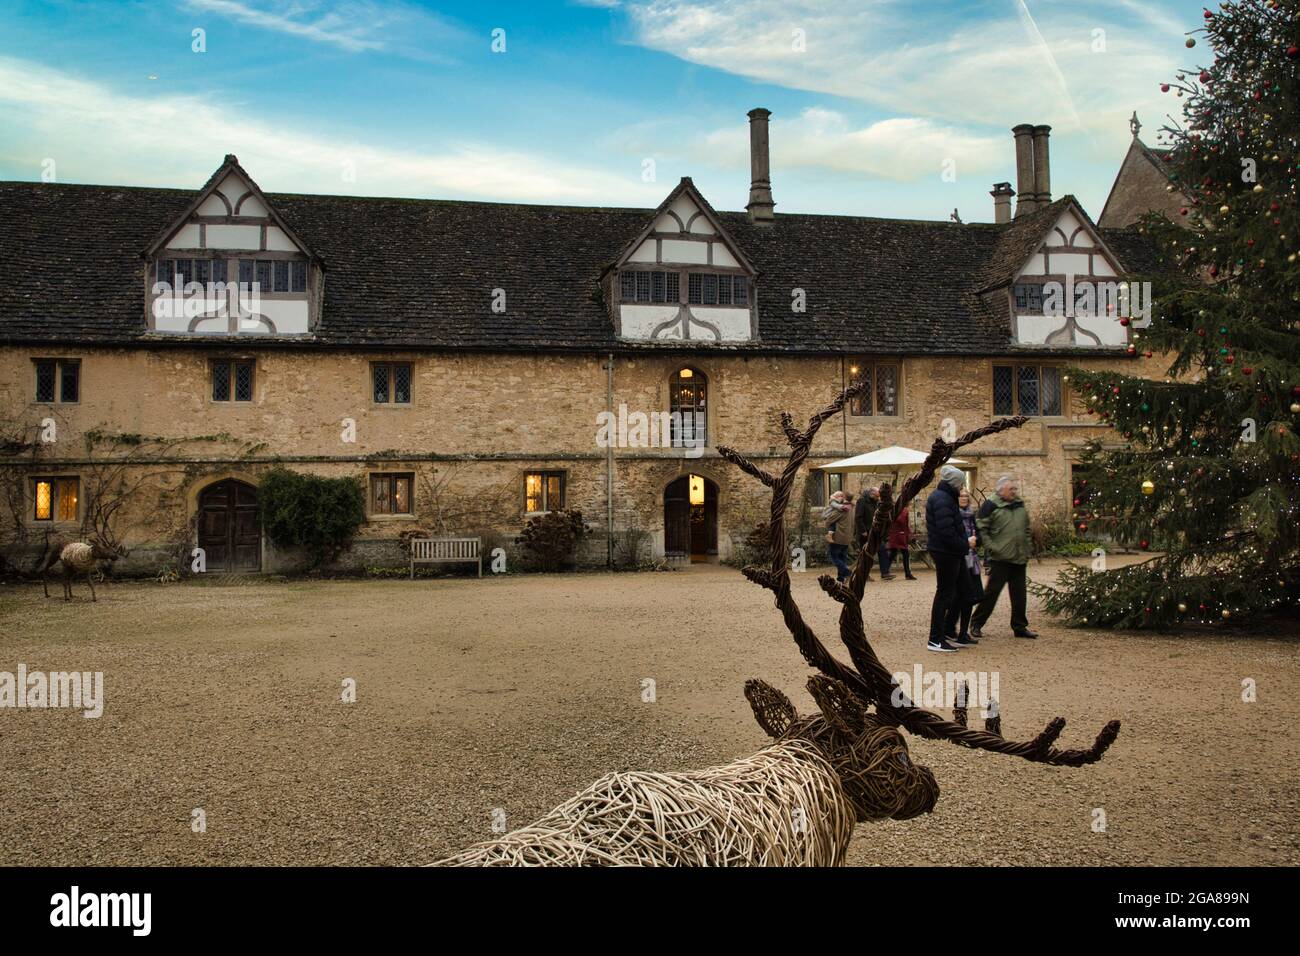 A row of pretty, classic old houses with a large flat area in front. Also a life size reindeer with antlers in the foreground at Lacock, Wiltshire, UK Stock Photo